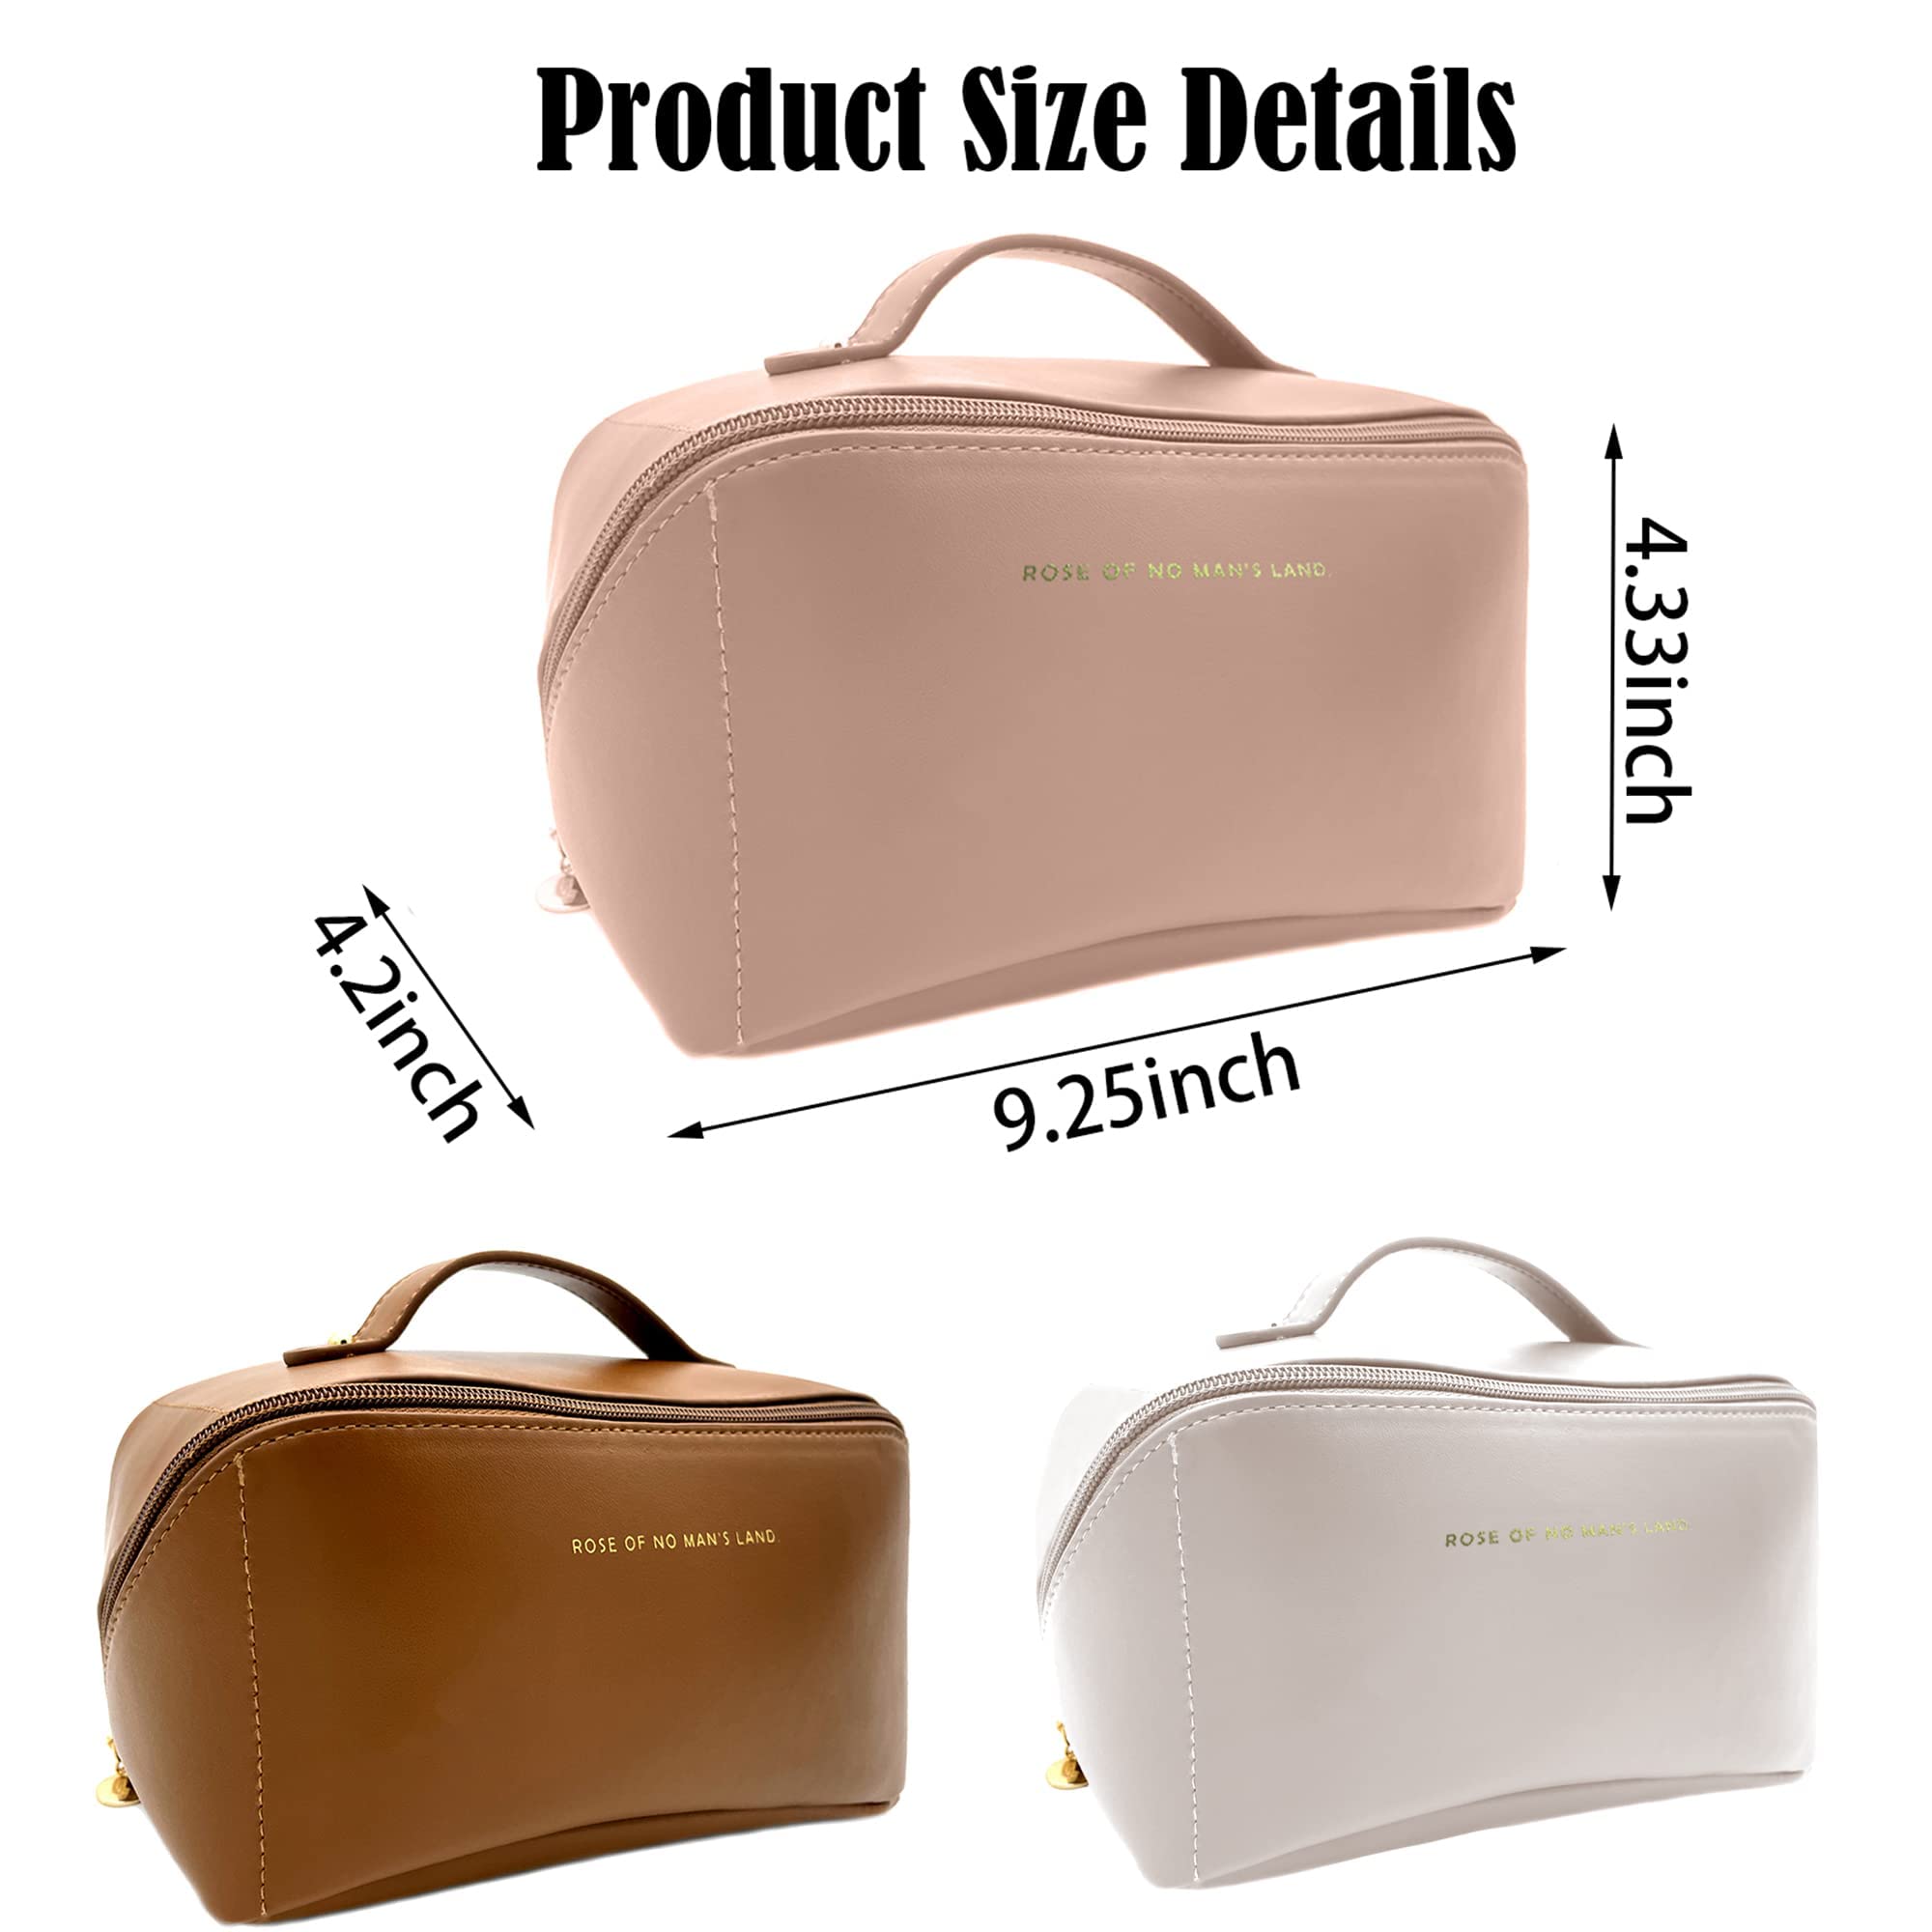 SHOPANTS Extra Large Makeup Bag Travel Cosmetic Bag for Women Portable PU  Leather Waterproof Make up Bag Set Checkered Cosmetic Bags with Handle